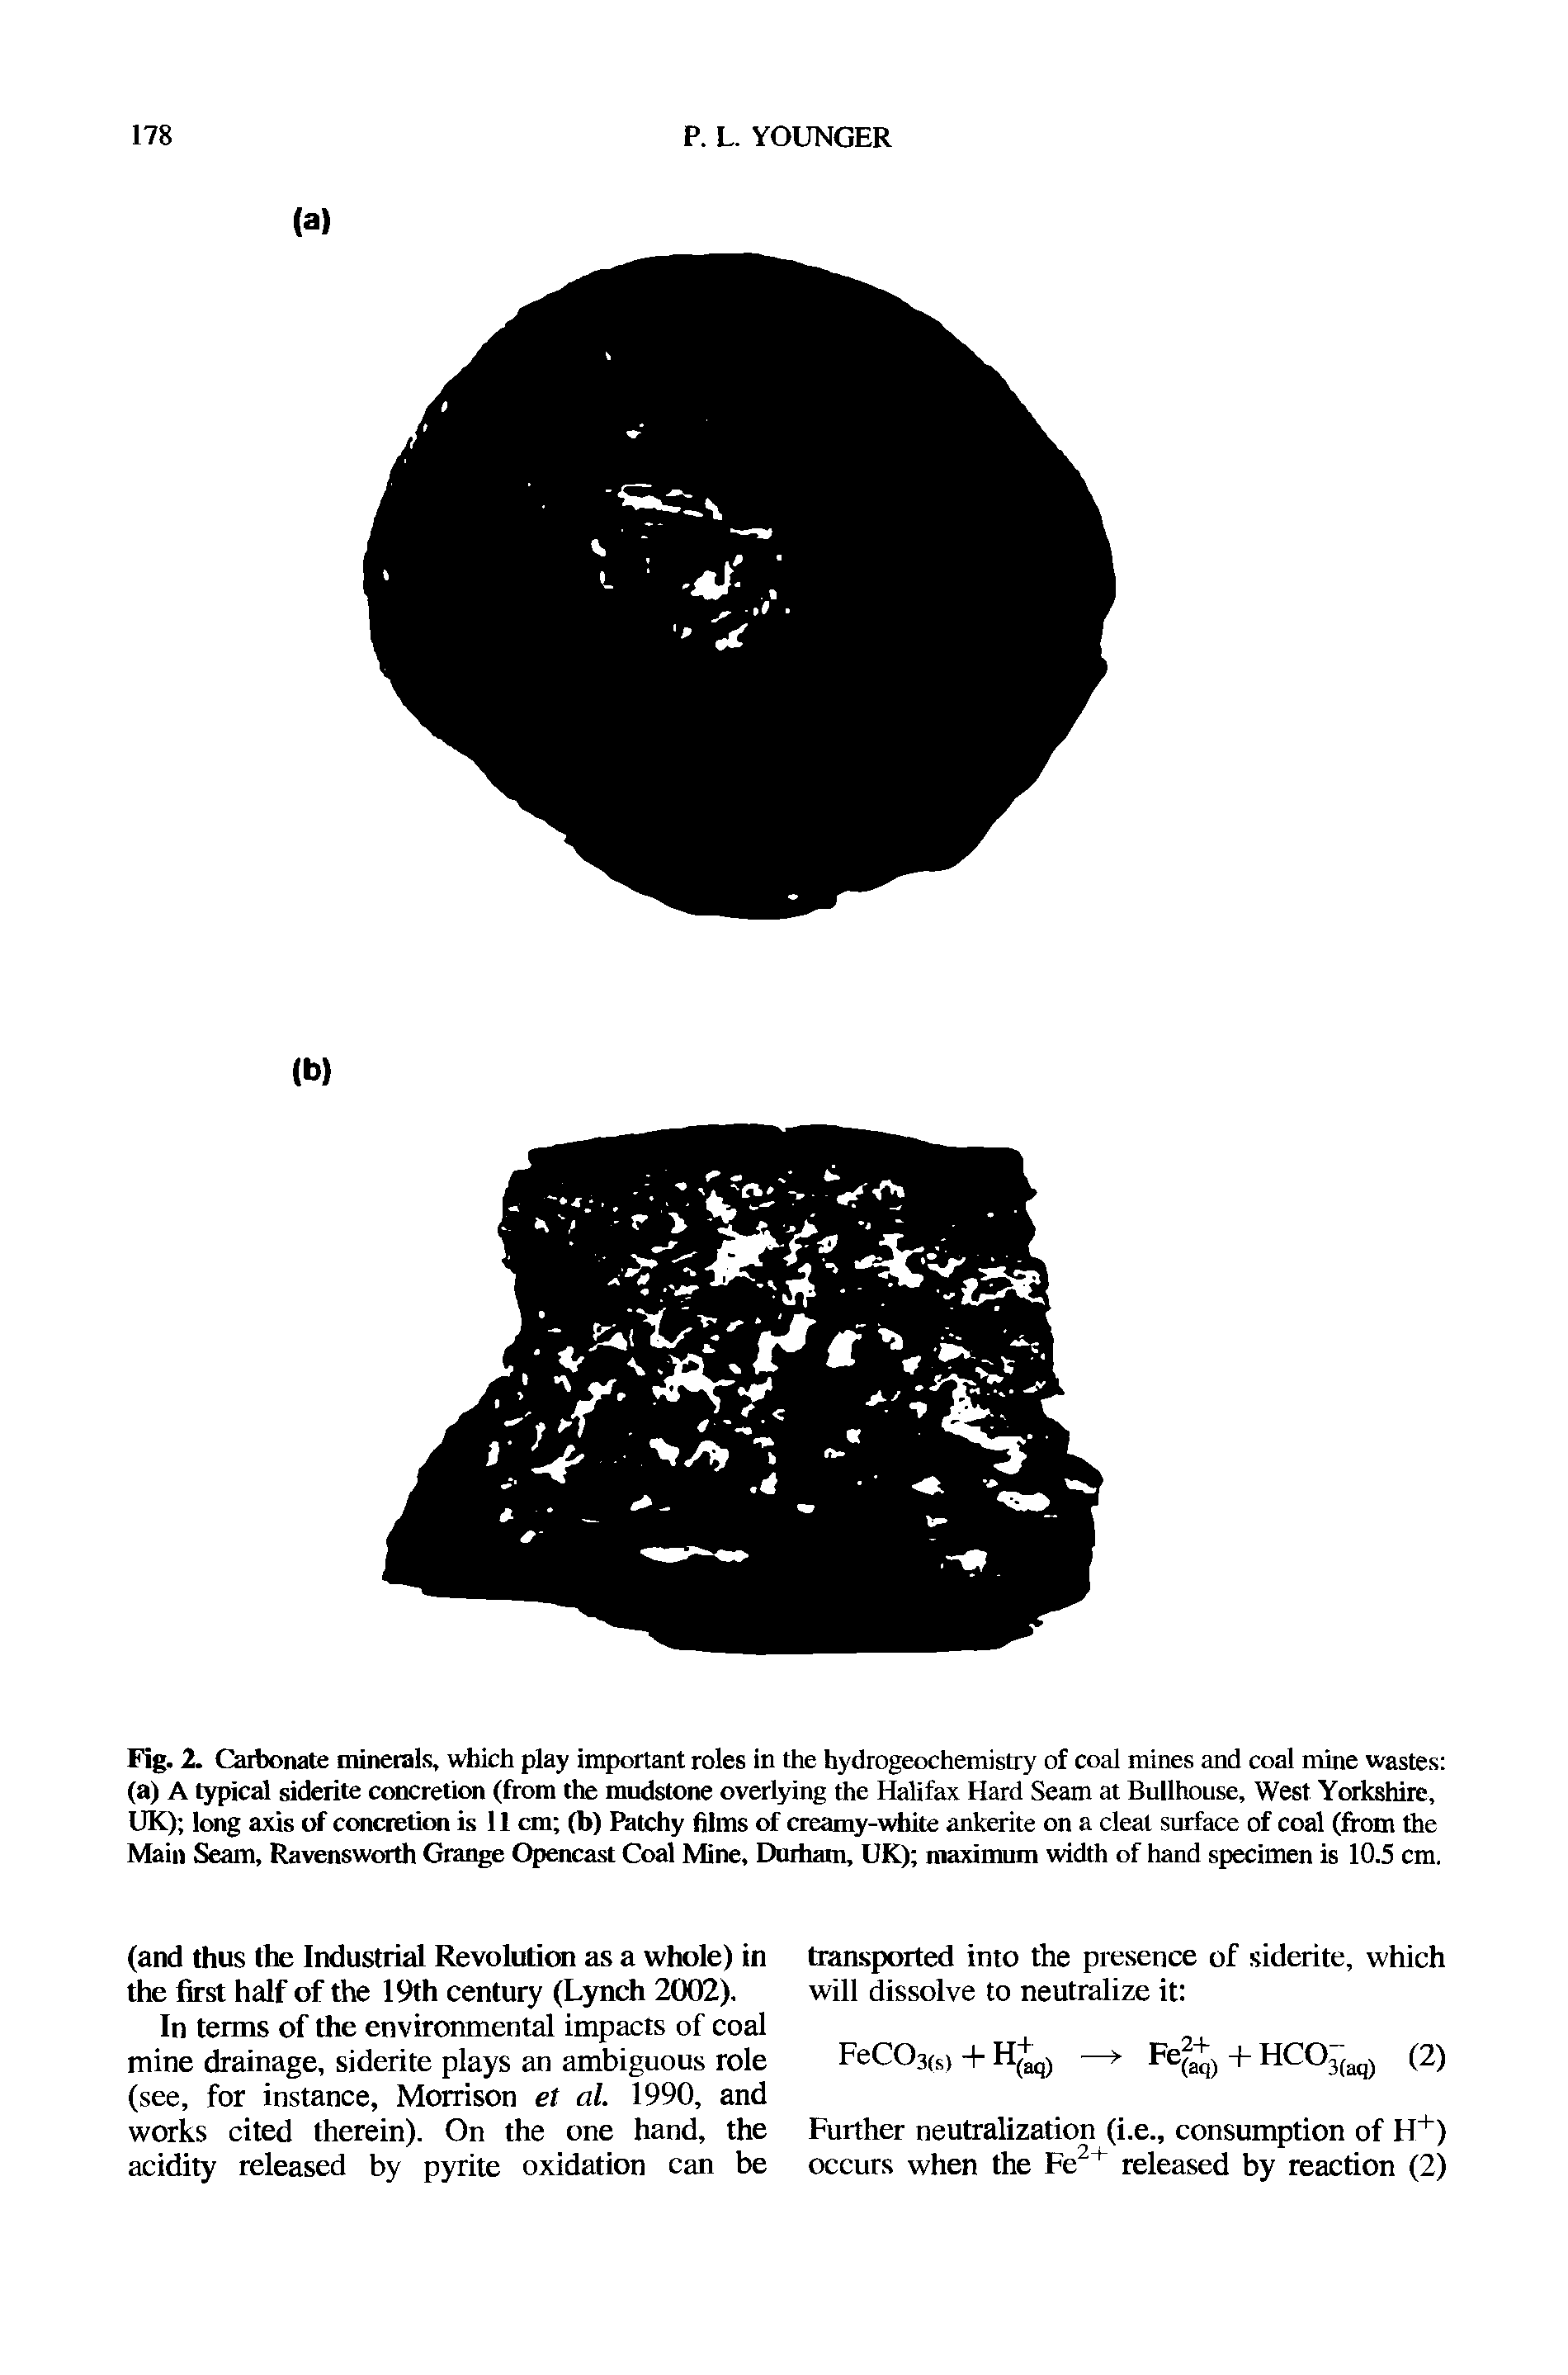 Fig. 2. Carbonate minerals, which play important roles in the hydrogeochemistry of coal mines and coal mine wastes (a) A typical siderite concretion (from the mudstone overlying the Halifax Hard Seam at Bullhouse, West Yorkshire, UK) long axis of concretion is 11 cm (b) Patchy films of creamy-white ankerite on a cleat surface of coal (from the Main Seam, Ravensworth Grange Opencast Coal Mine, Durham, UK) maximum width of hand specimen is 10.5 cm.